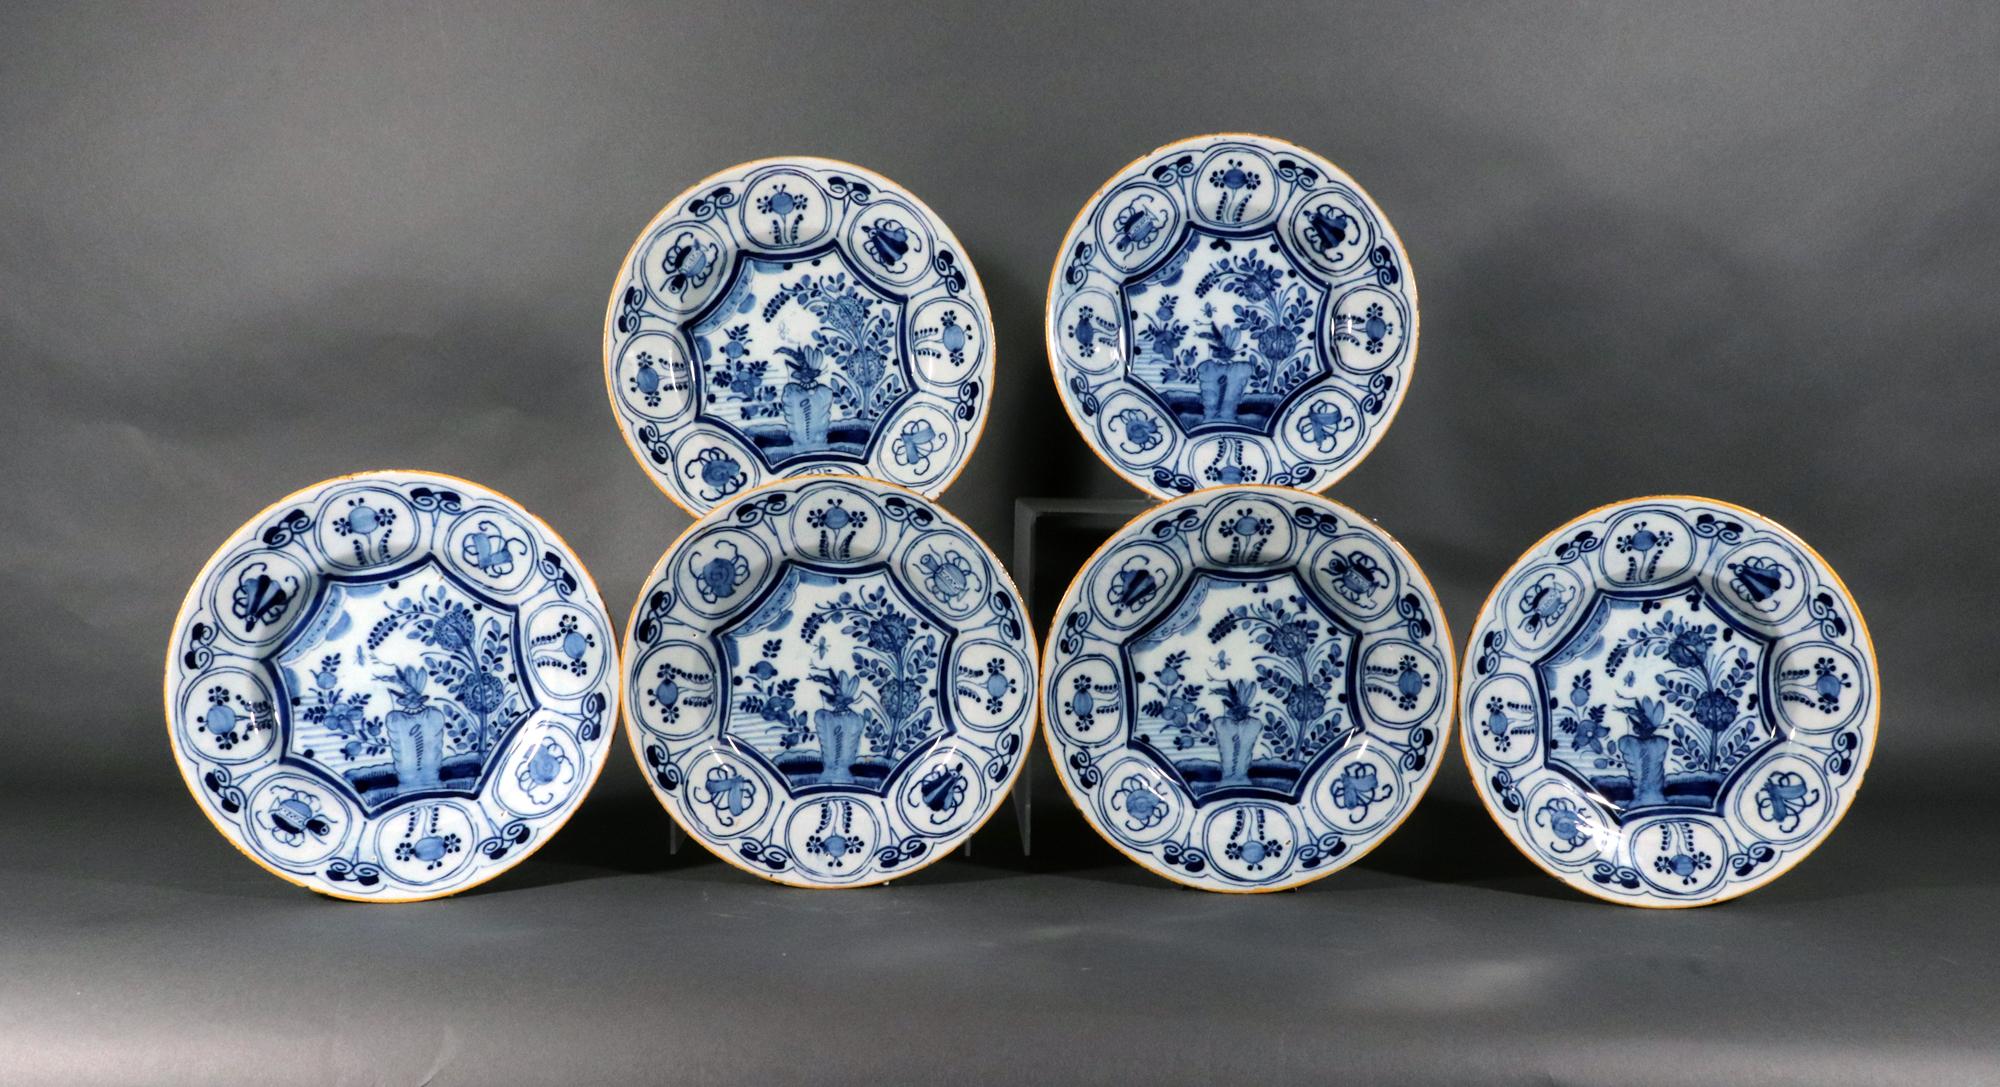 Dutch Delft Underglaze Blue & White Chinoiserie Dragonfly Plates, 
De Klaauw Factory (The Claw Factory),
Circa 1750

The set of six Dutch Delft Chinoiserie plates depicts a large dragonfly sitting on a large blue rock in a stylized Chinese garden. 